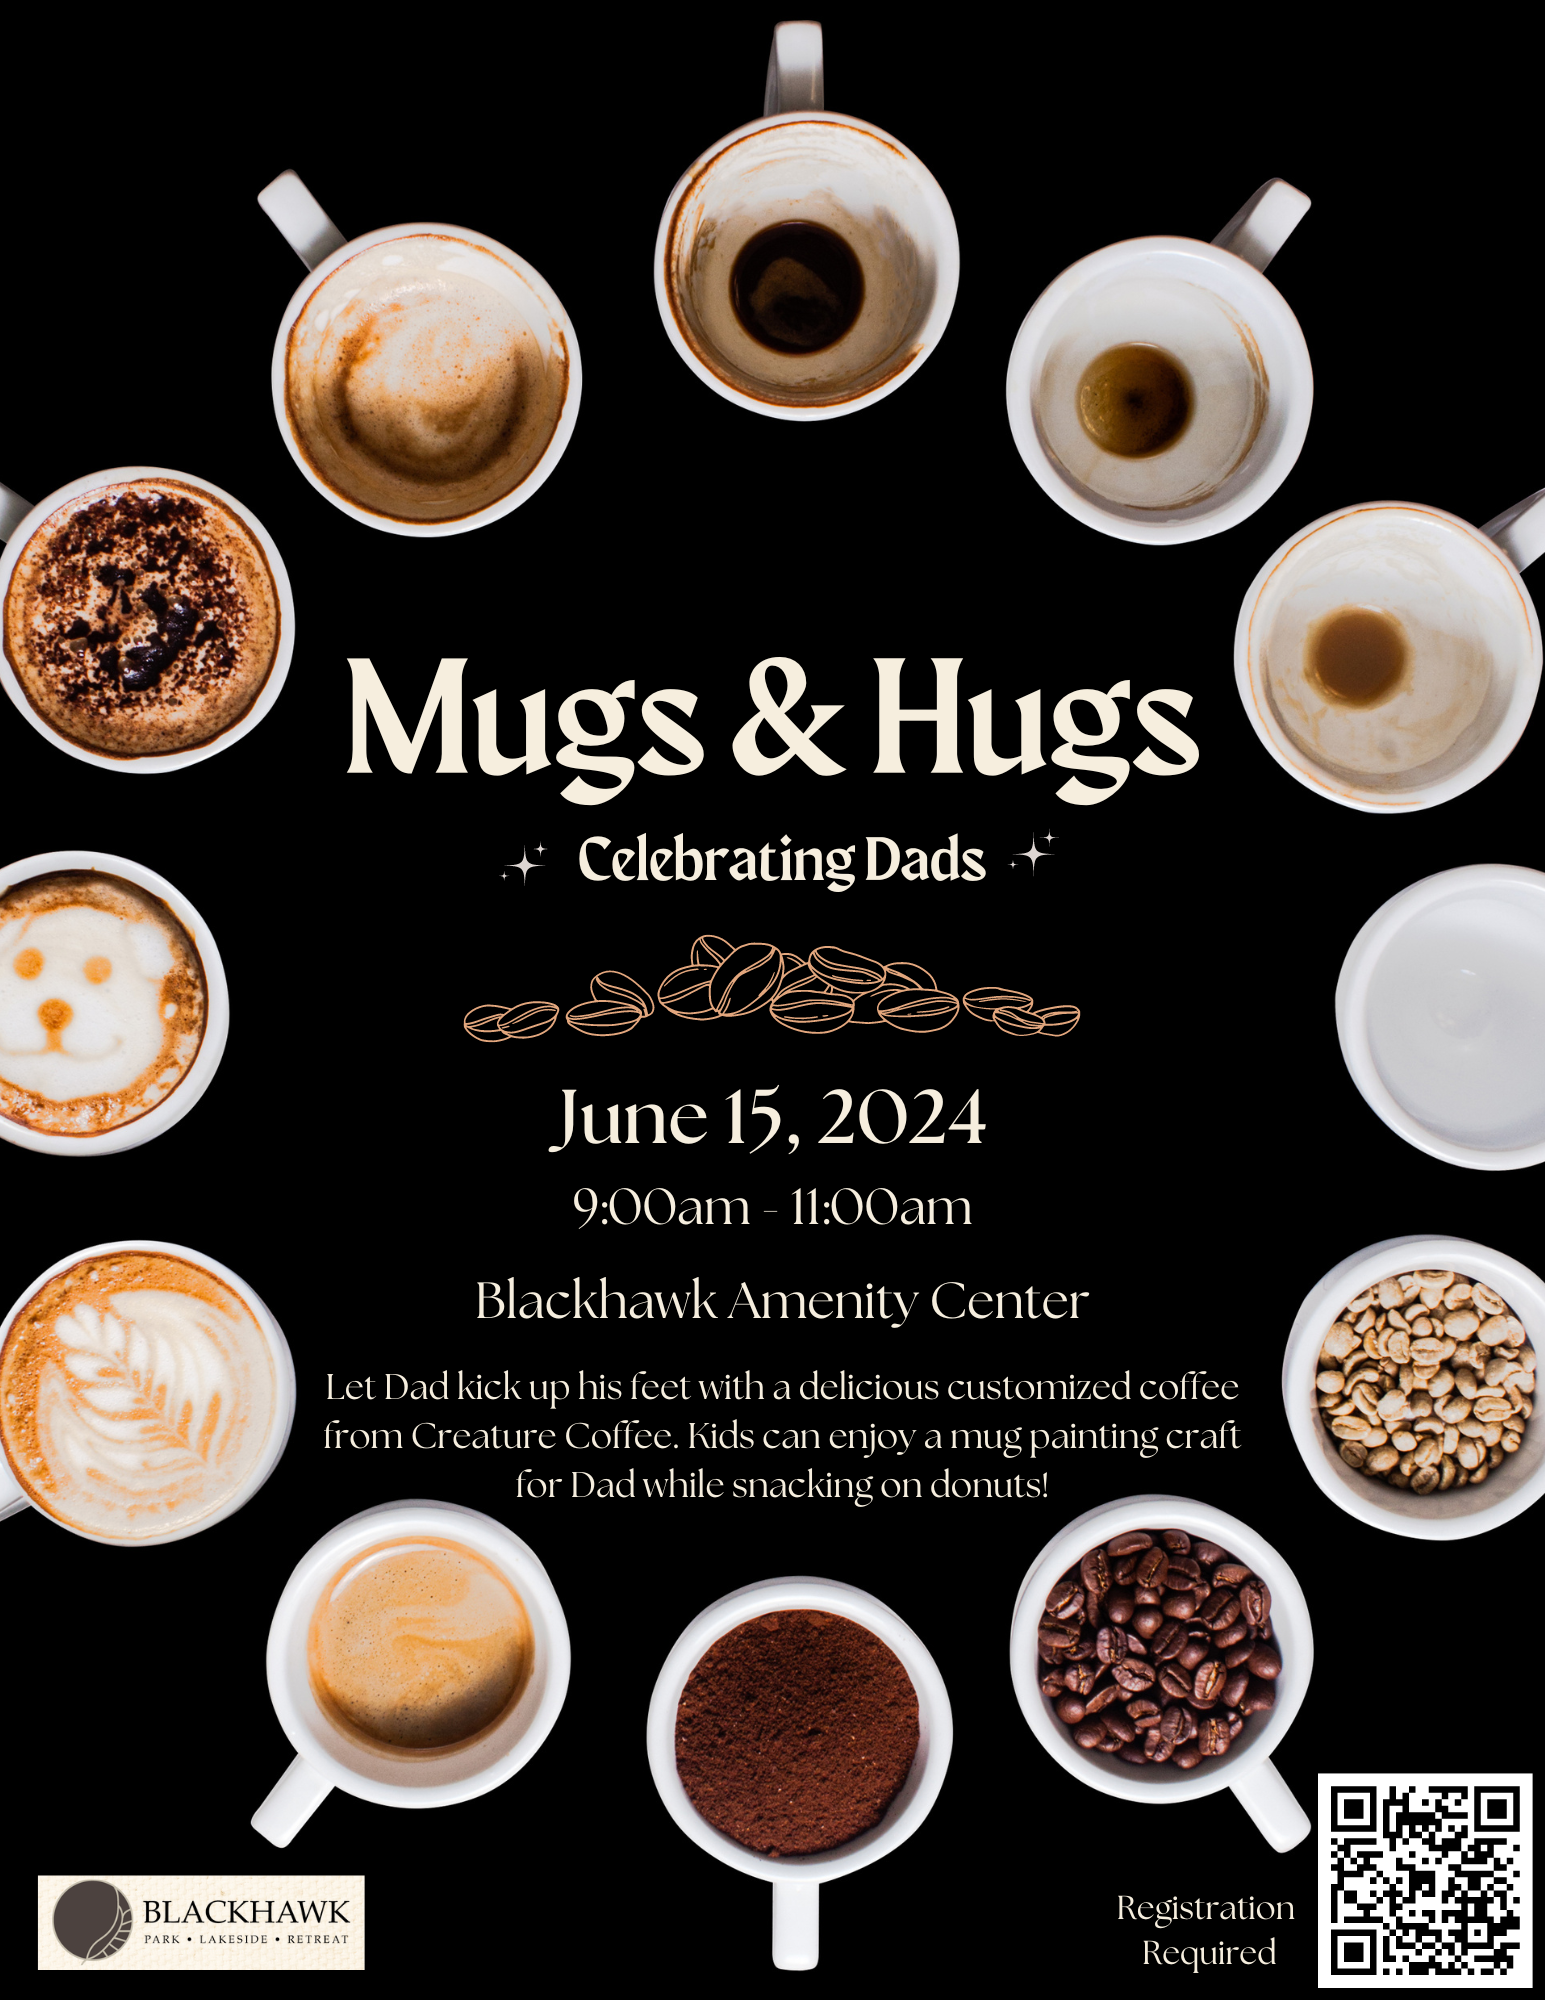 Promotional flyer for the 'Mugs & Hugs' event celebrating dads. Features an array of coffee cups from an overhead view, each with different stages of coffee consumption, surrounded by coffee beans and coffee grounds. Central text reads 'Mugs & Hugs, Celebrating Dads,' with event details stating June 15, 2024, from 9:00am - 11:00am at Blackhawk Amenity Center. Description invites dads to relax with a customized coffee from Creature Coffee, while kids can enjoy mug painting and donuts. The Blackhawk logo is at the bottom with a QR code for registration, indicating that registration is required.